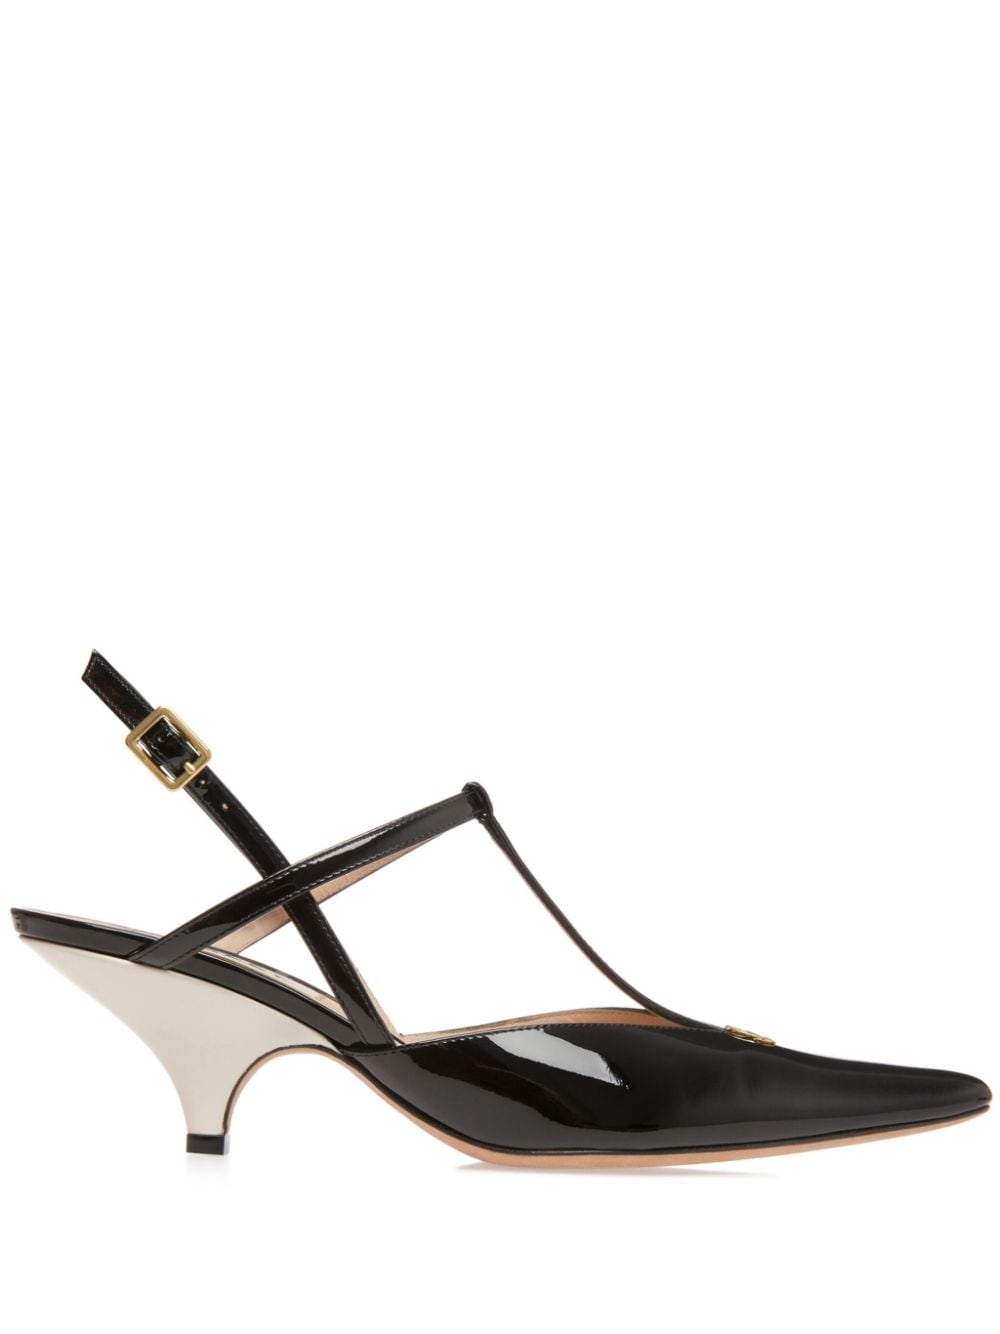 BALLY KARLINE 55MM POINTED-TOE PUMPS